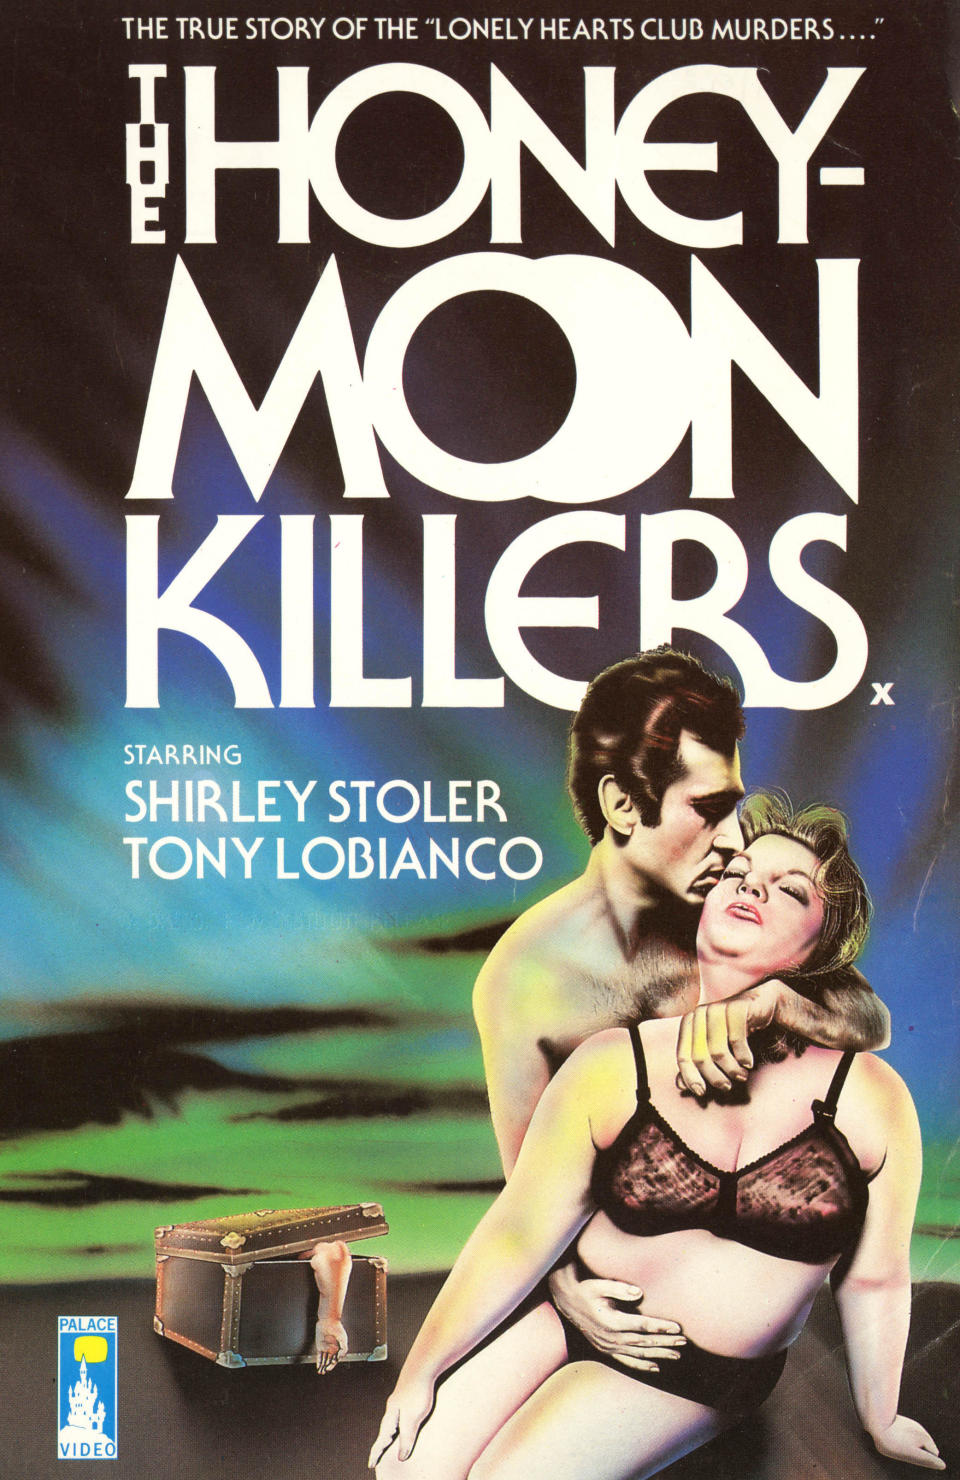 Poster image for the movie "The Honeymoon Killers" with a painting depicting the two lovers embracing; the woman is wearing lingerie and the man is seemingly nude, and there is a box behind them with an arm coming out